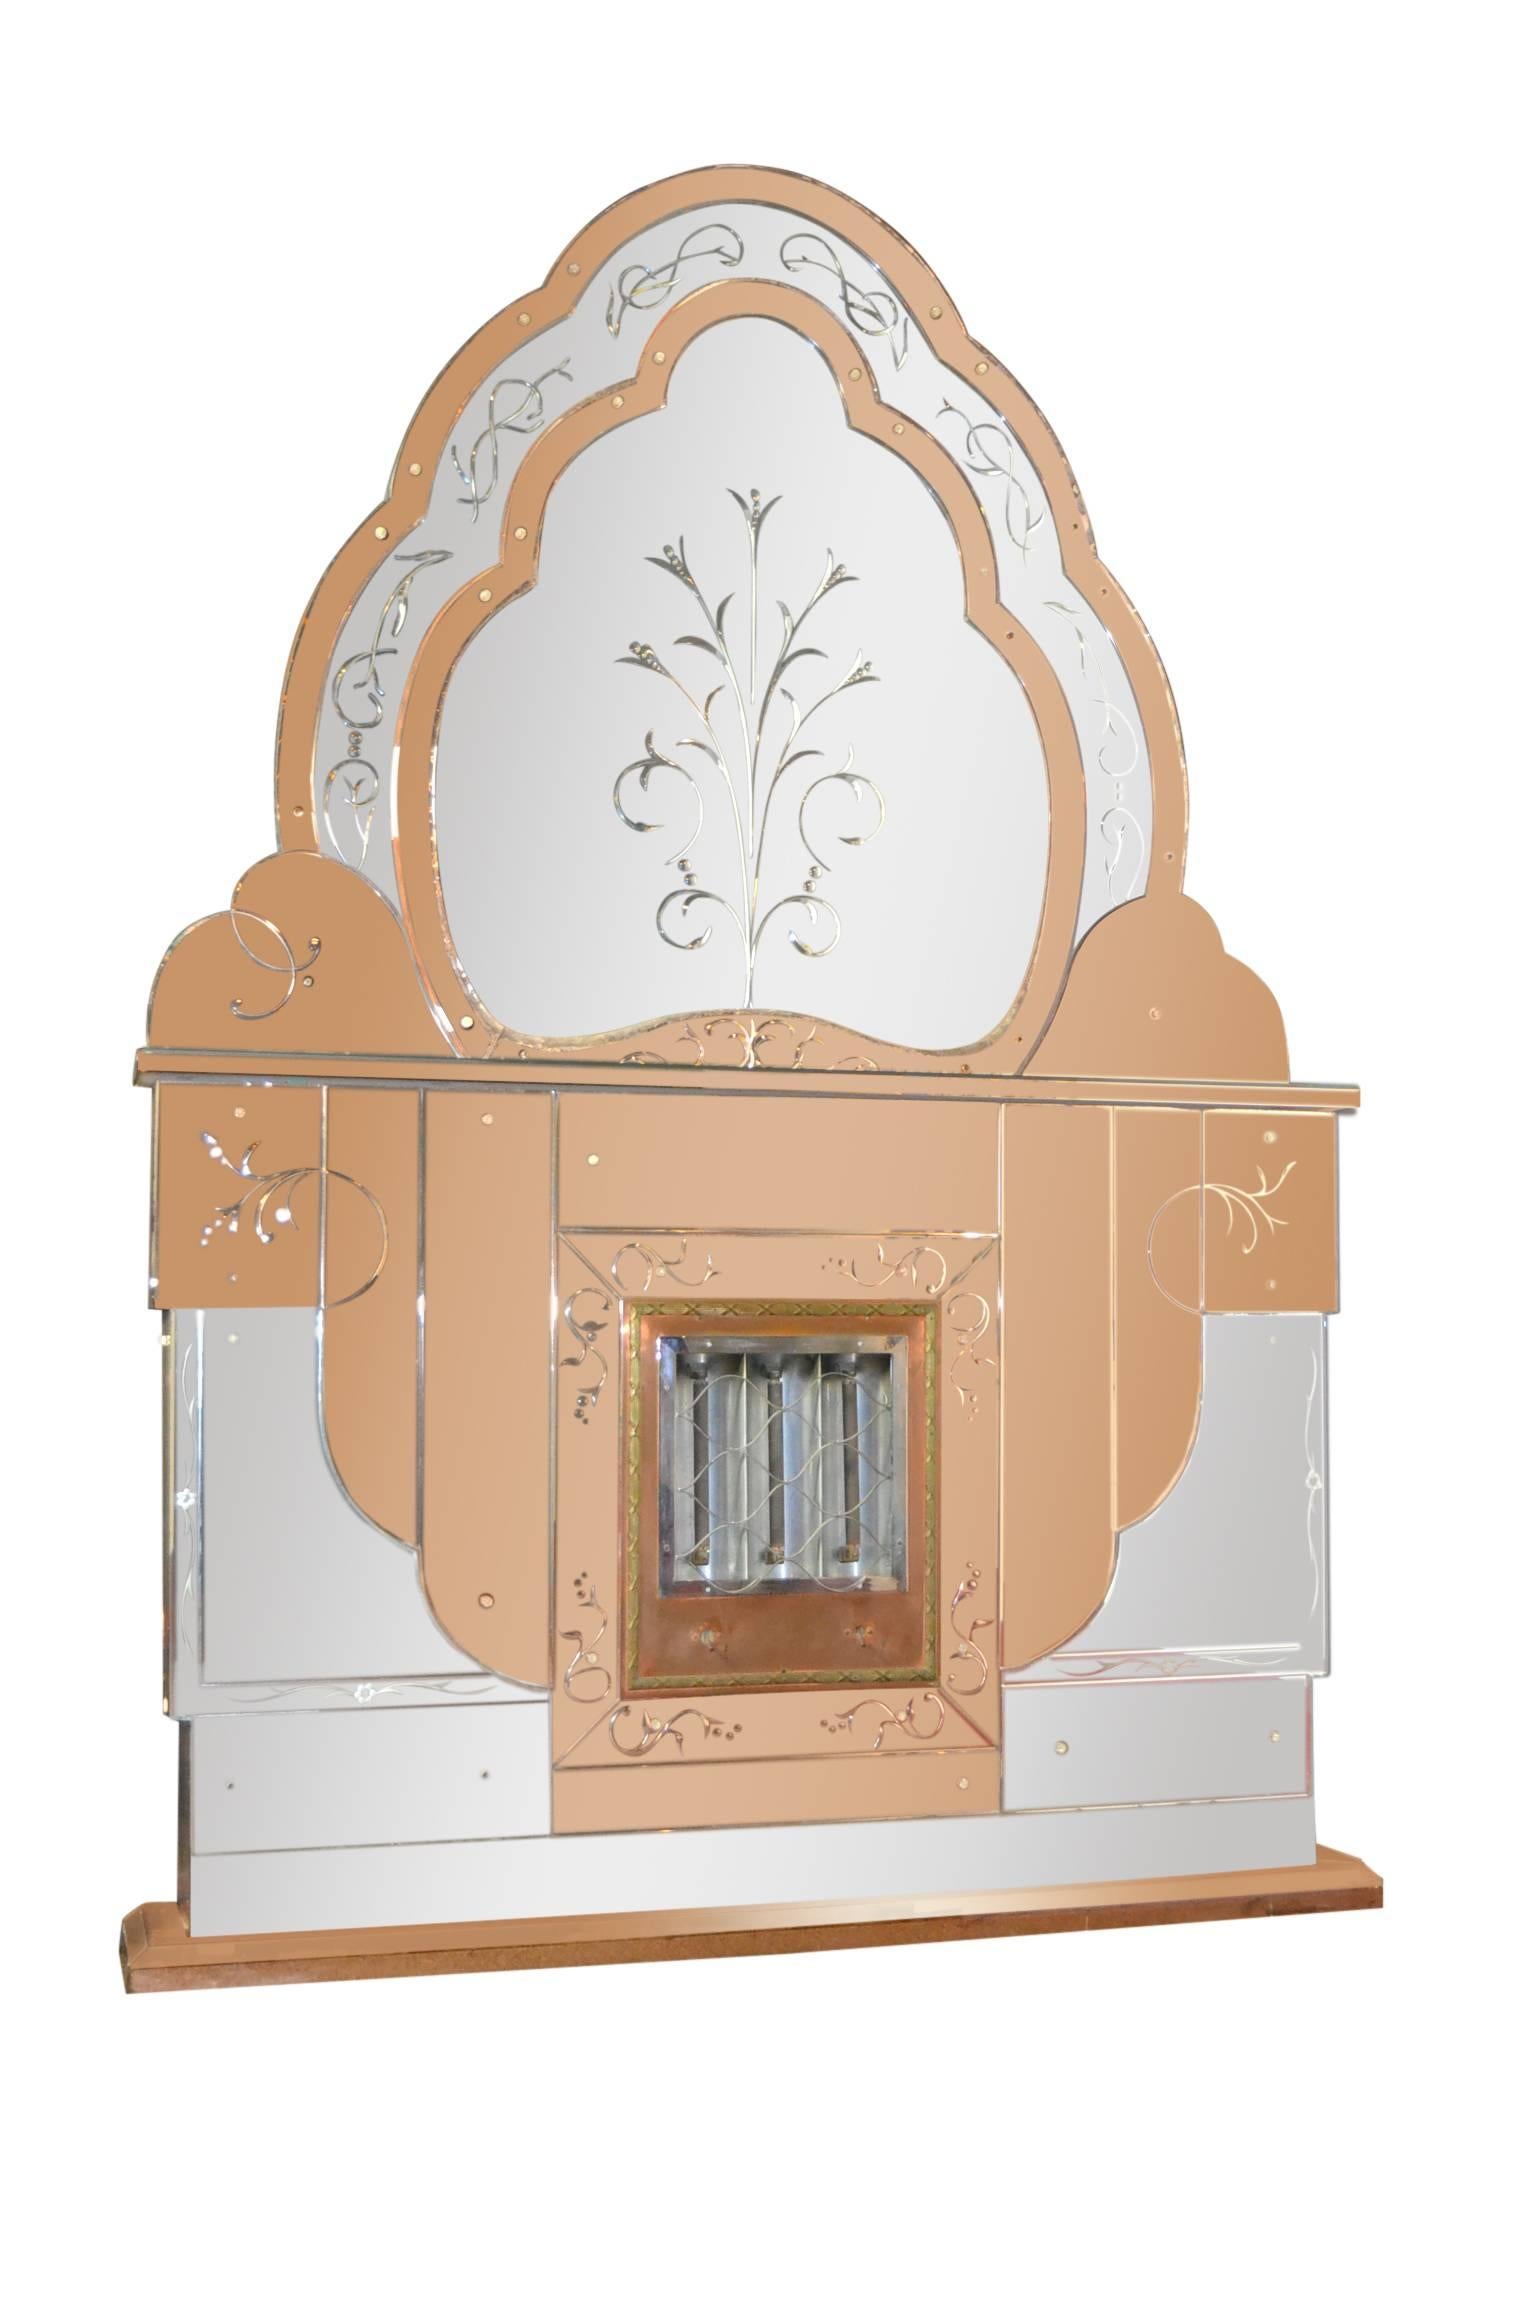 20th Century 1930s Art Deco Electric Fireplace with Beveled Two Colored Overmantel Mirror For Sale